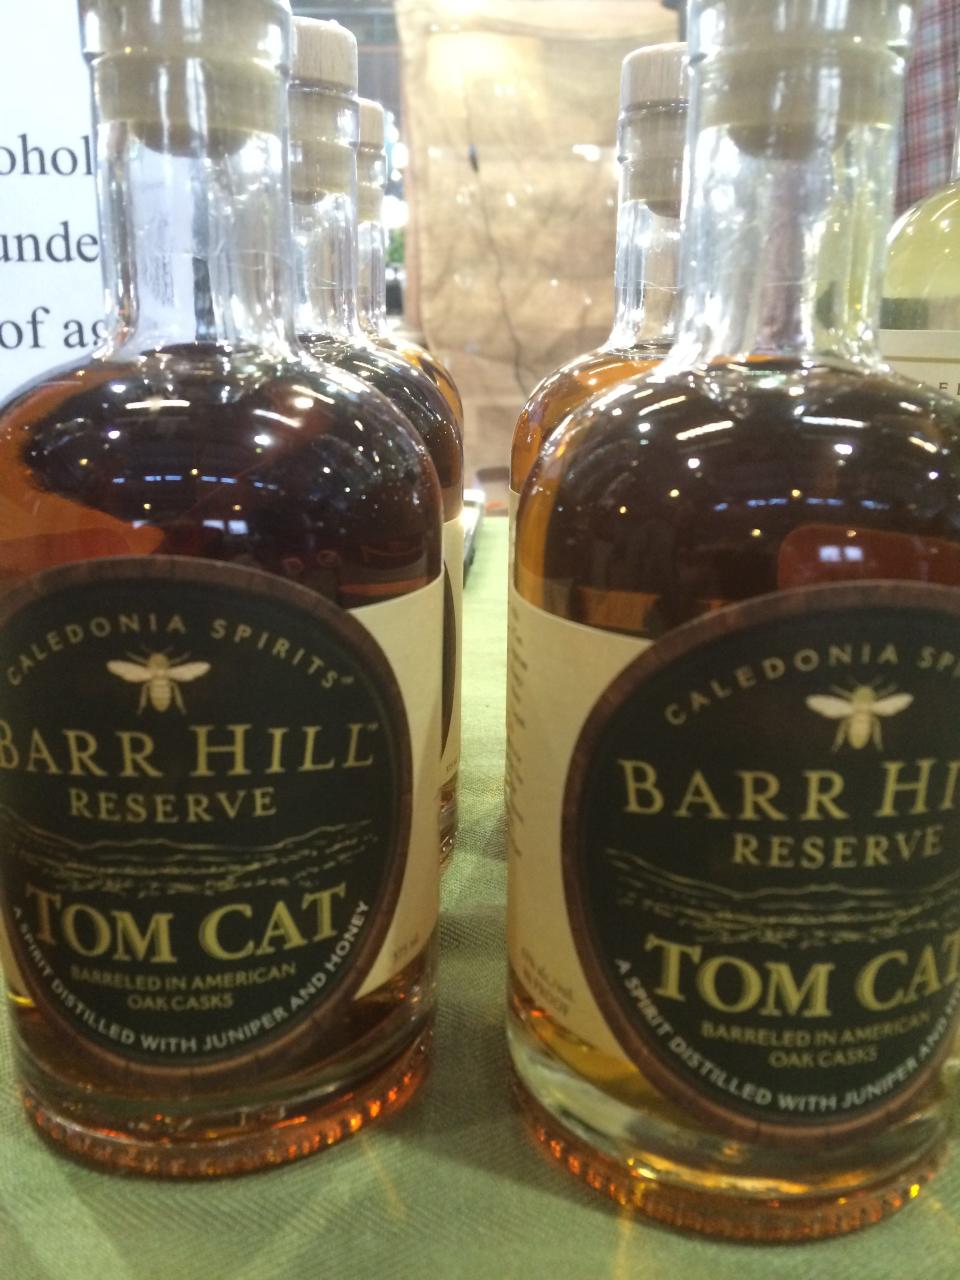 Tom Cat gin made by Caledonia Spirits is Barr Hill gin aged in a barrel.